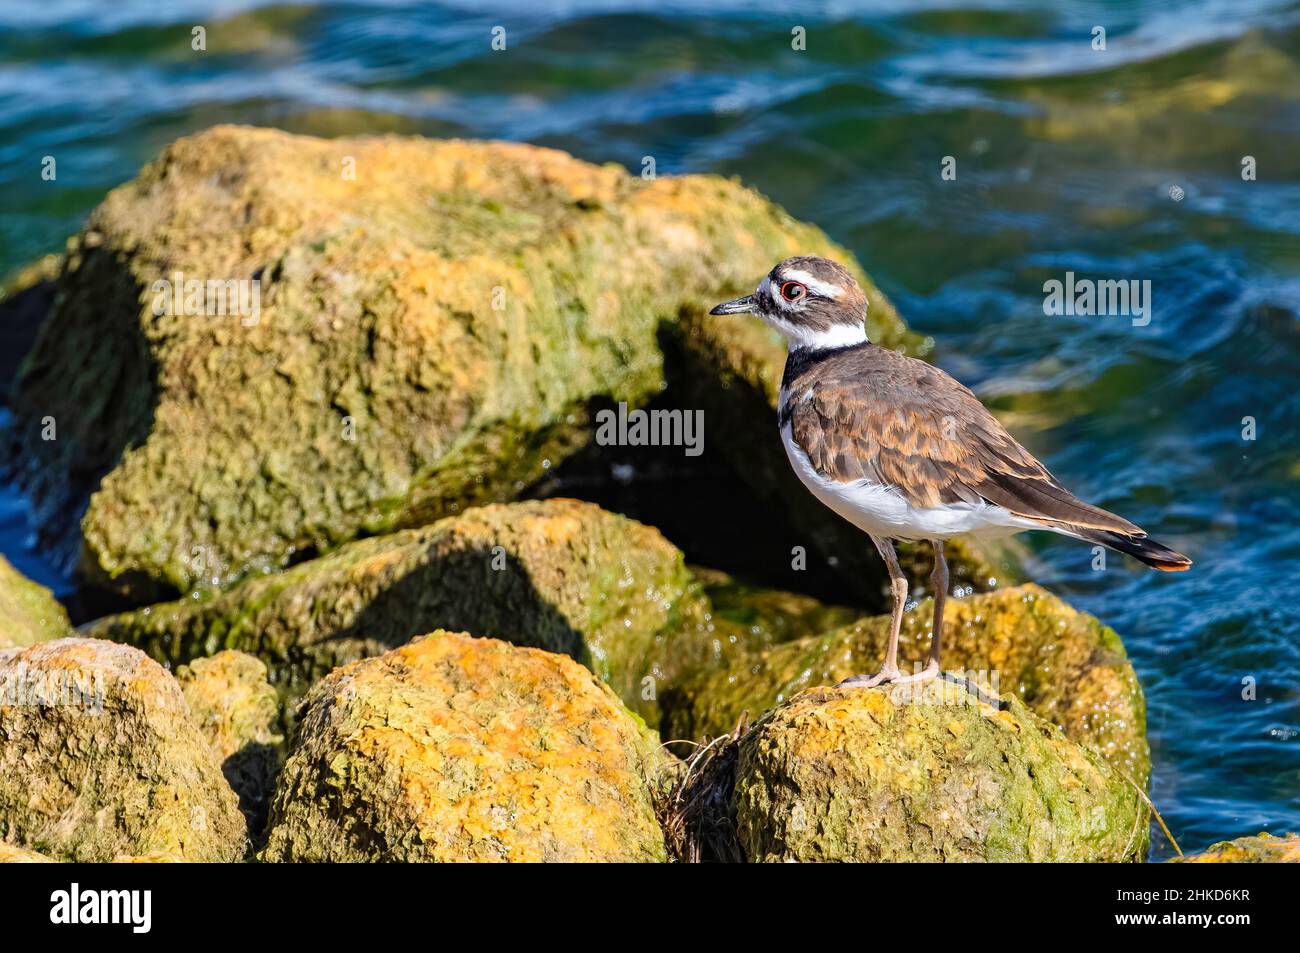 Closeup of a Killdeer bird standing on a mossy yellow boulder along the shoreline of a large lake. Stock Photo